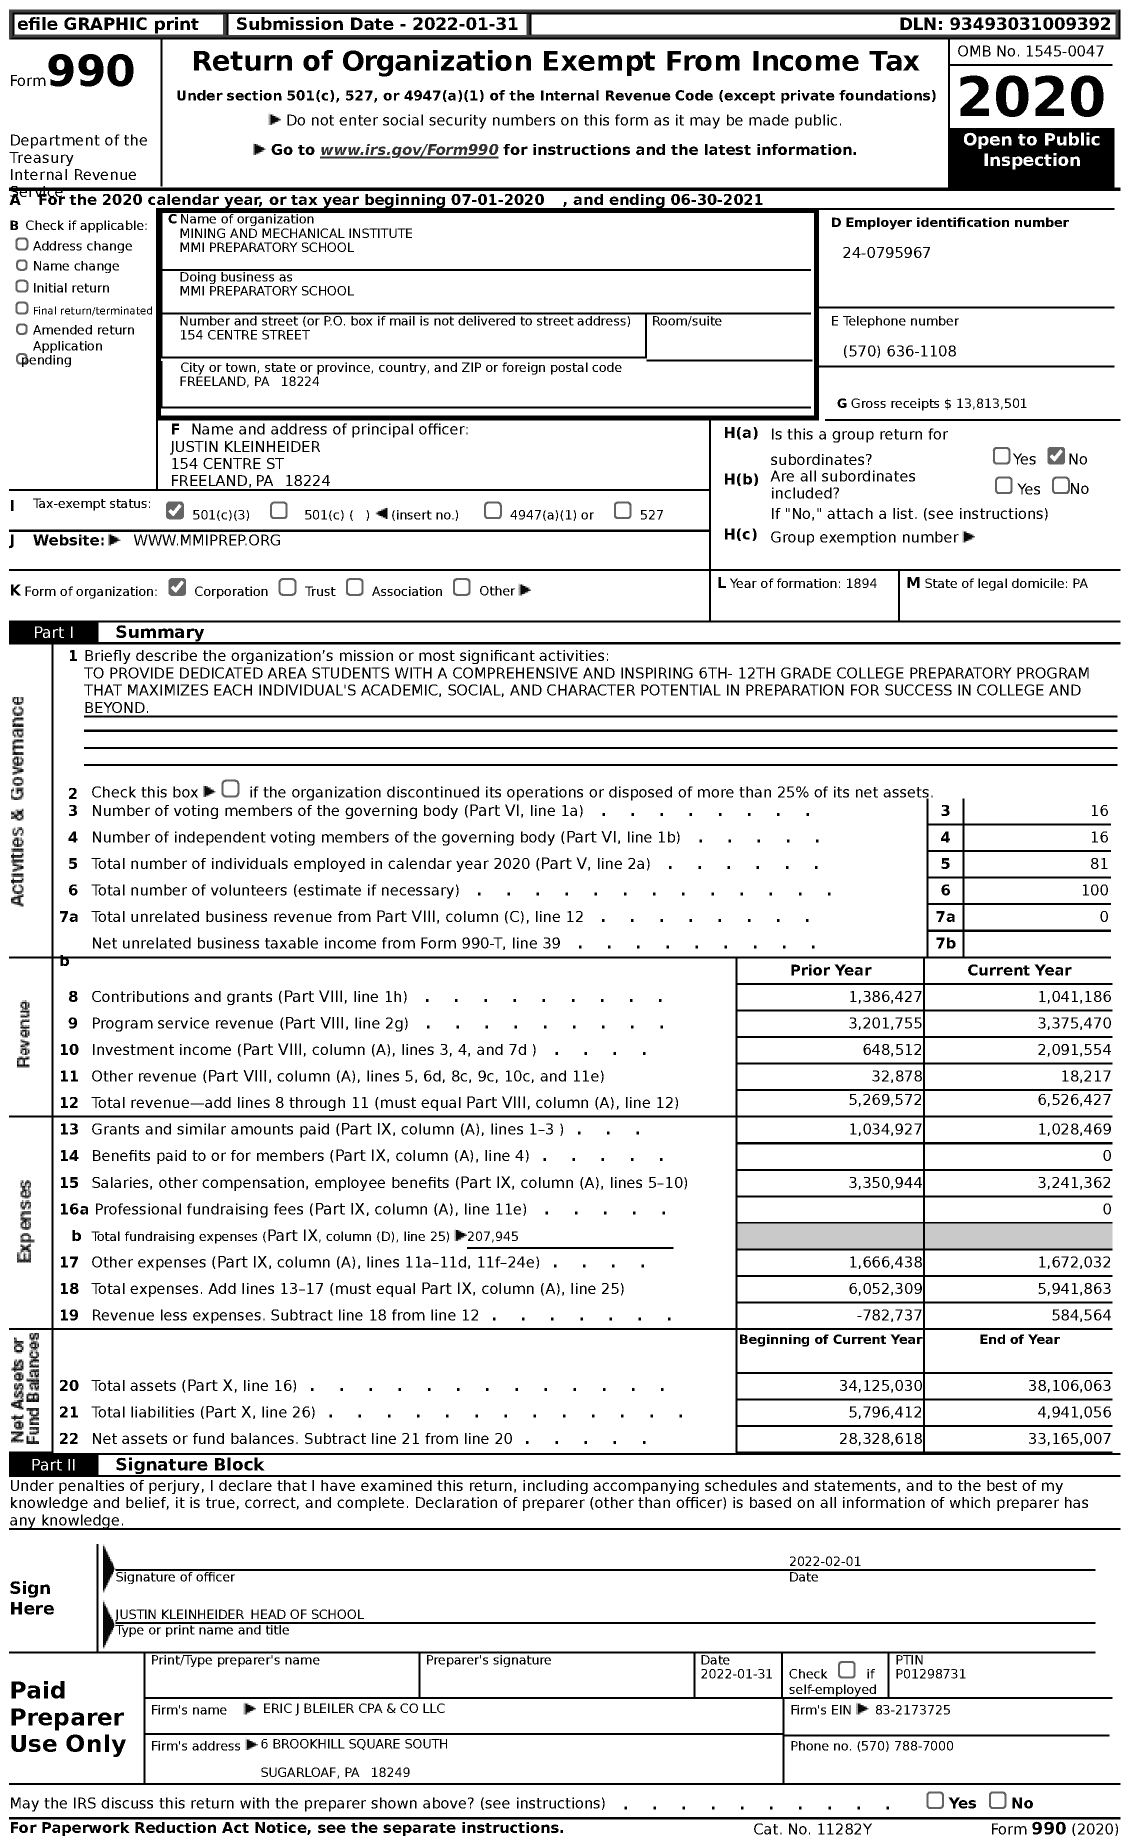 Image of first page of 2020 Form 990 for Mining and Mechanical Institute Mmi Preparatory School (MMI)